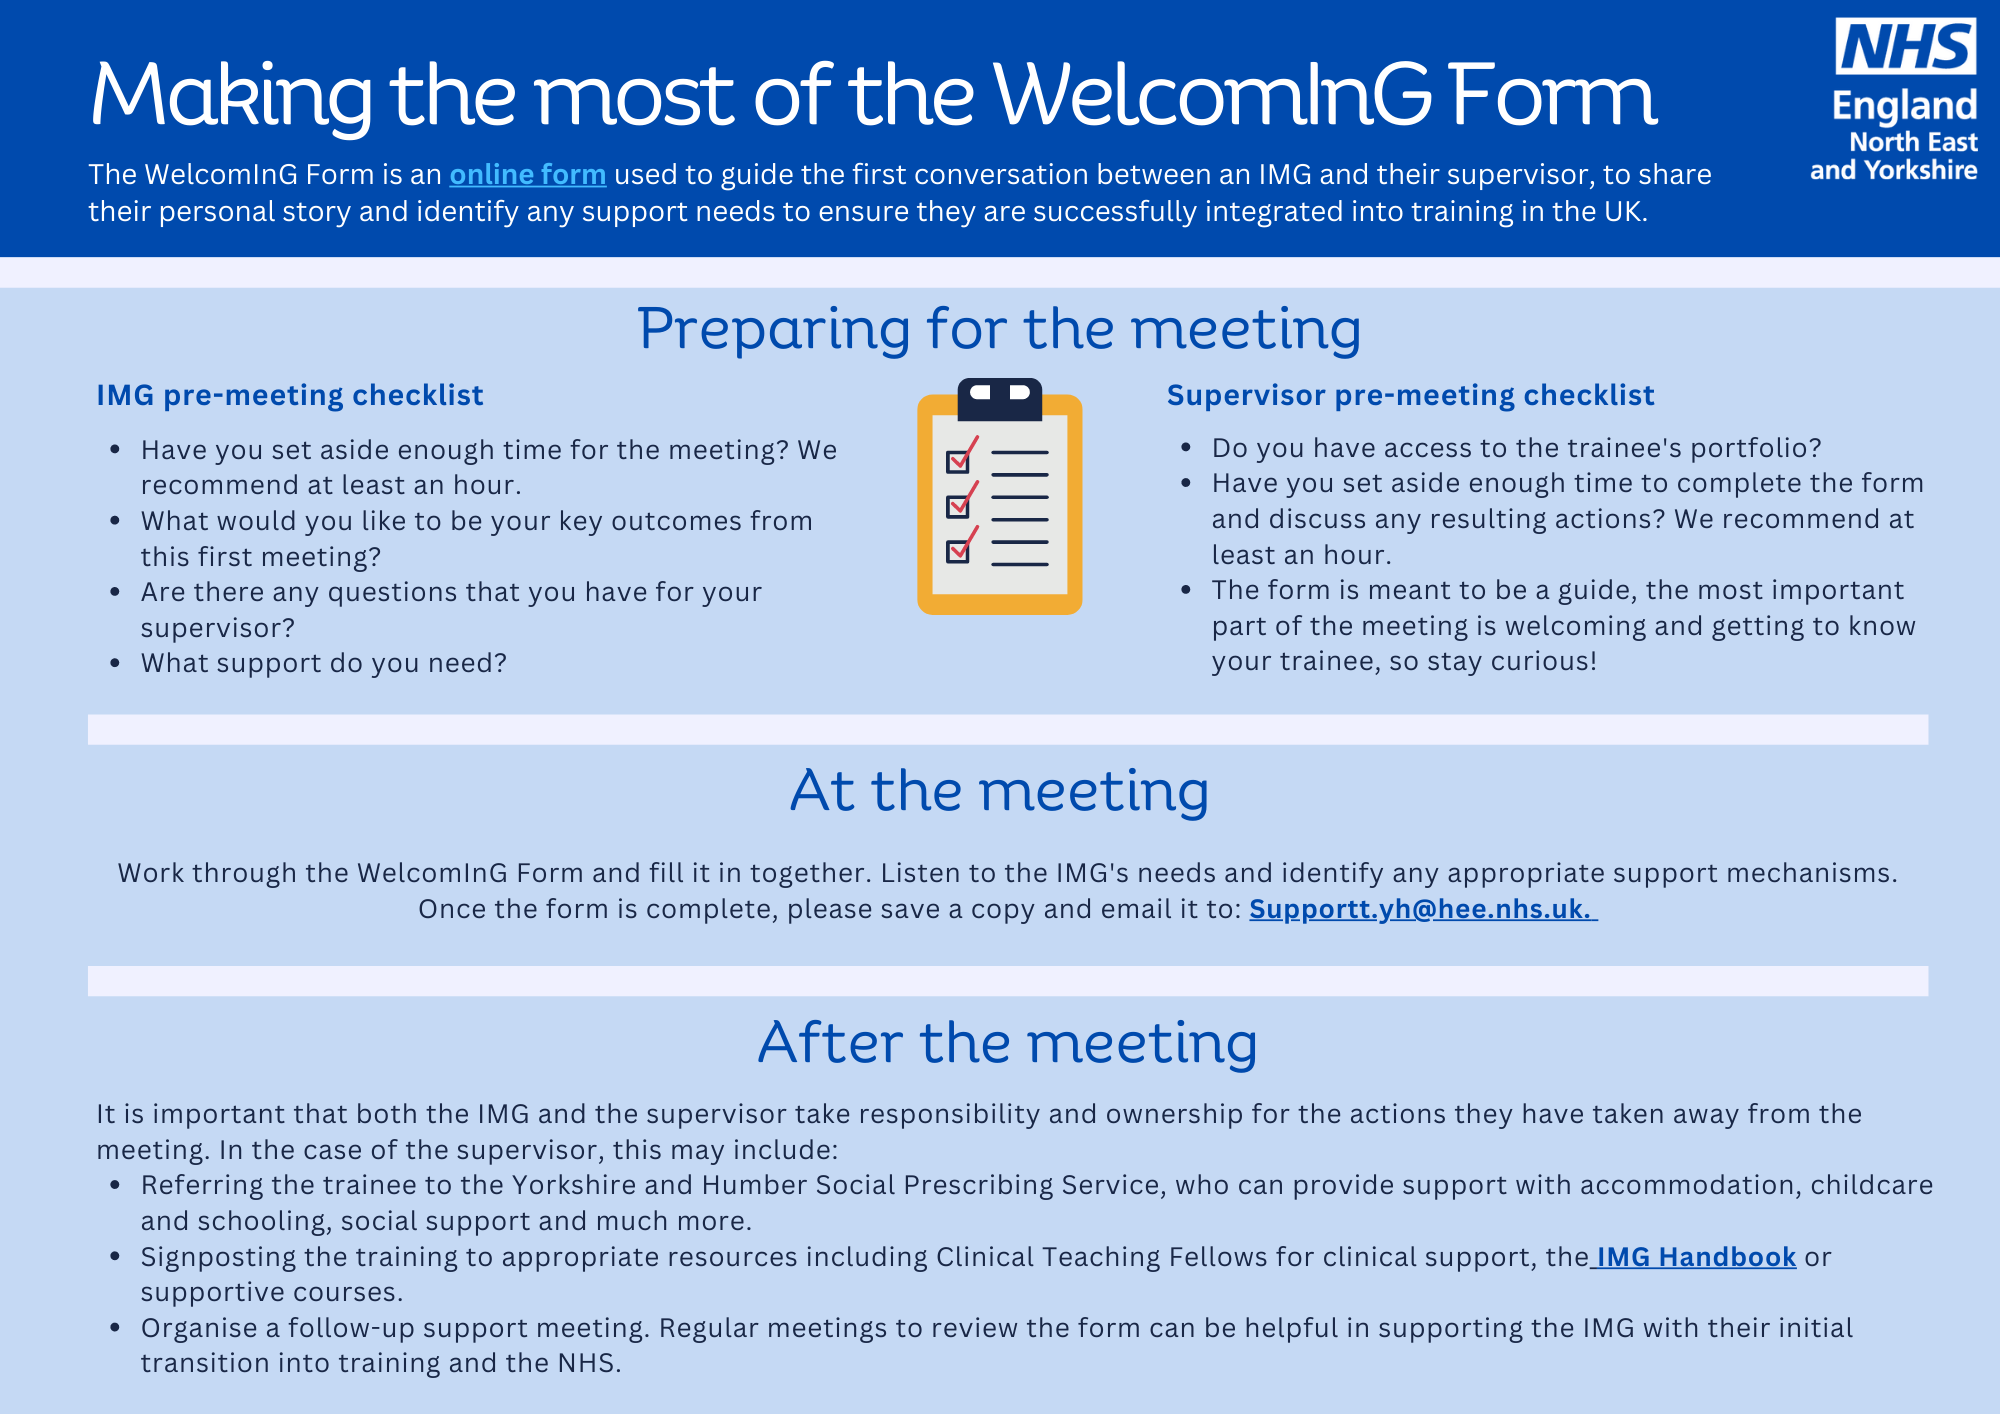 Poster explaining how to make the most of the WelcomInG Form